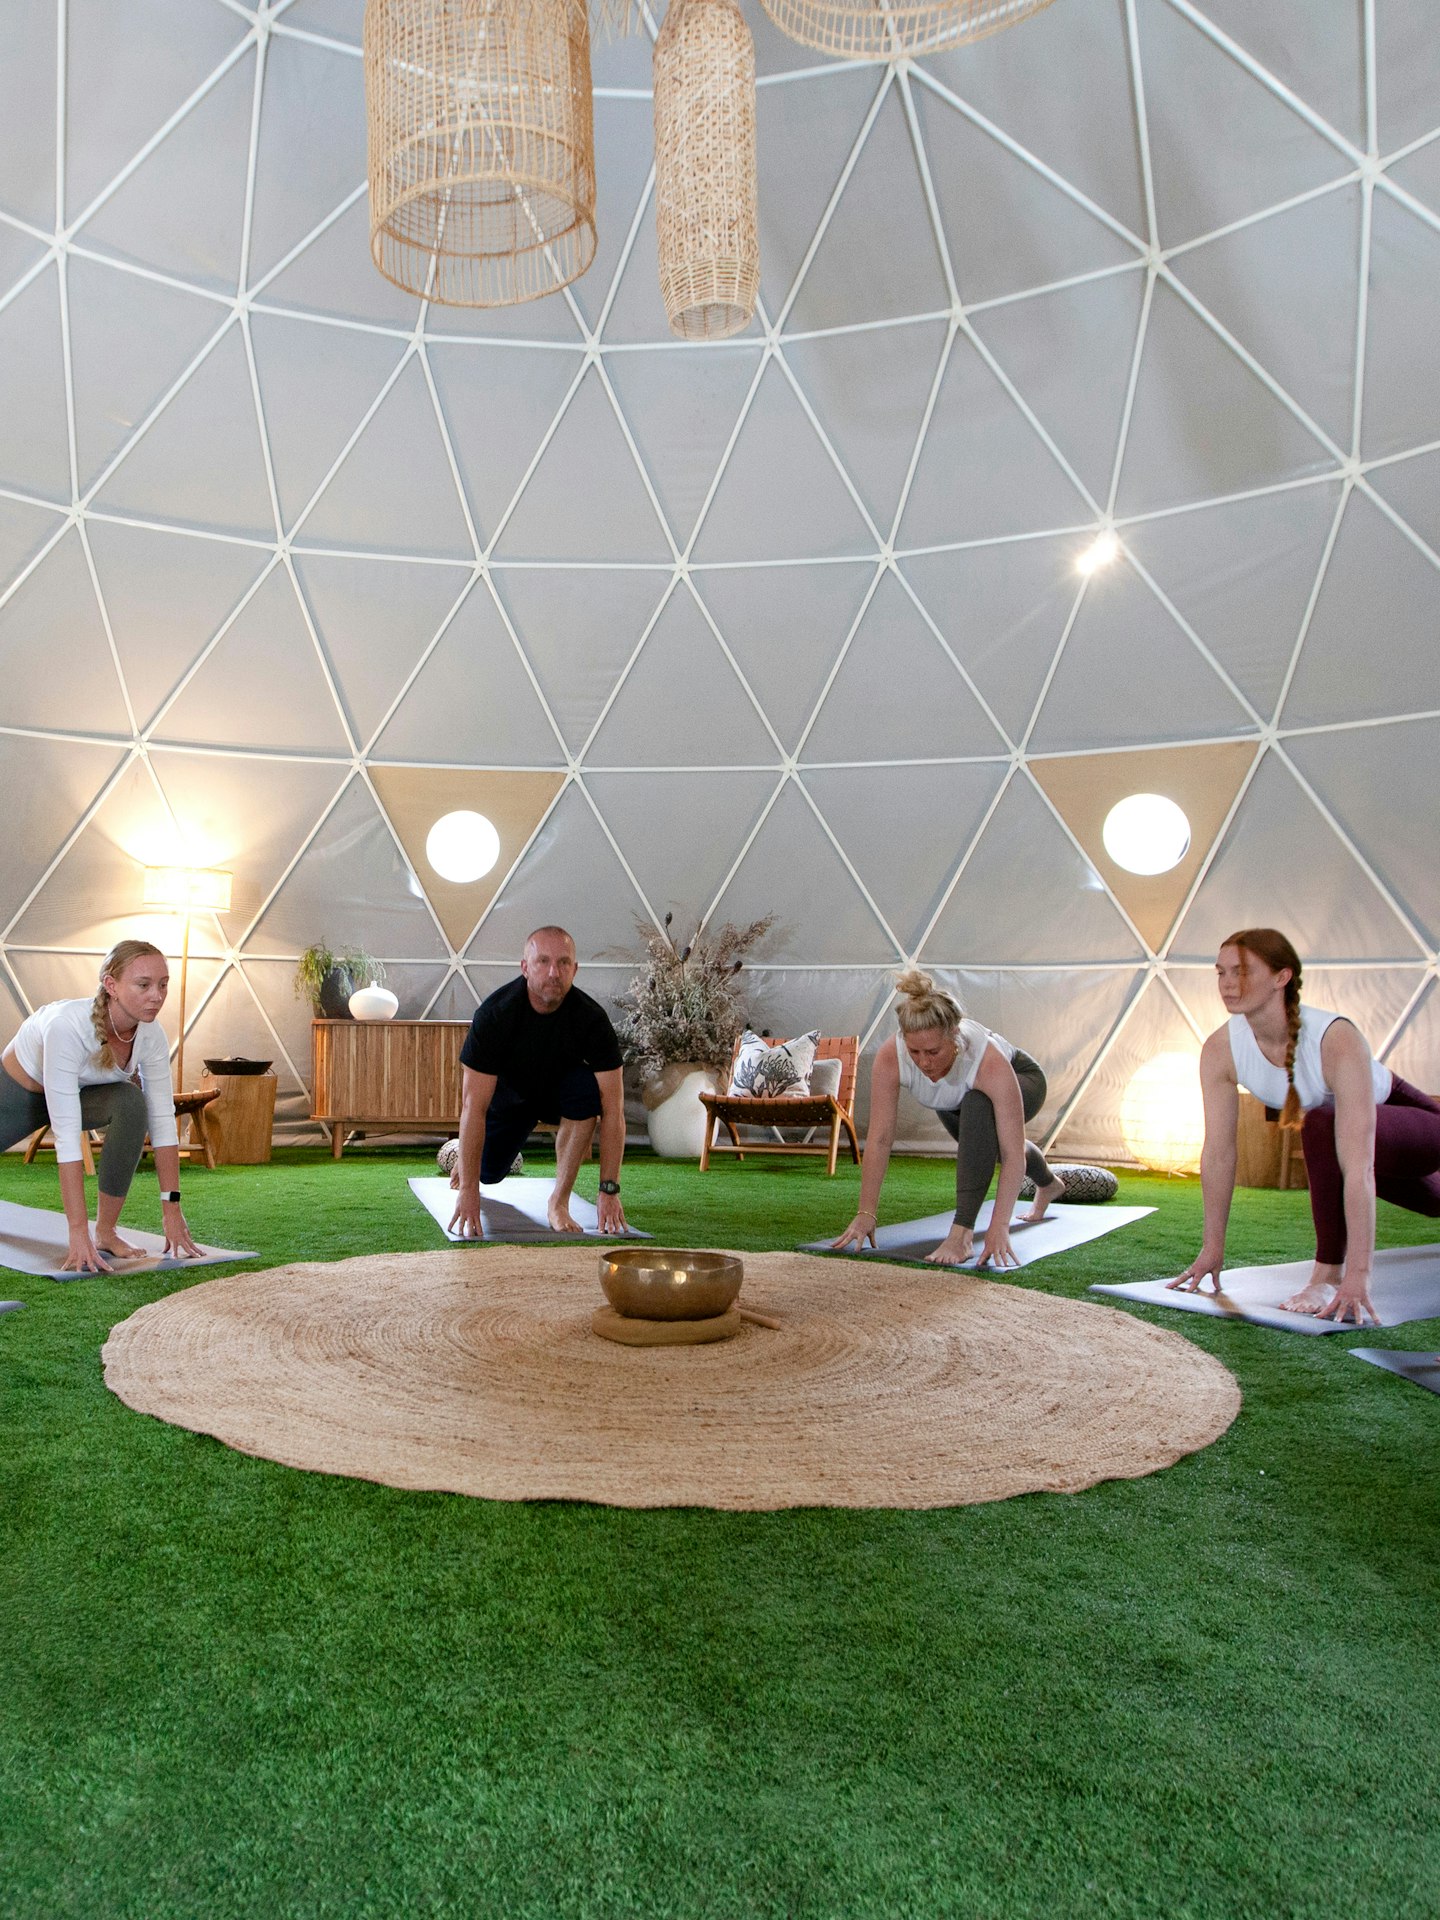 dream house dome tent - dome tent for entertainment - dome house for spa,gym,,yoga - communal zone for glampingsite (10)